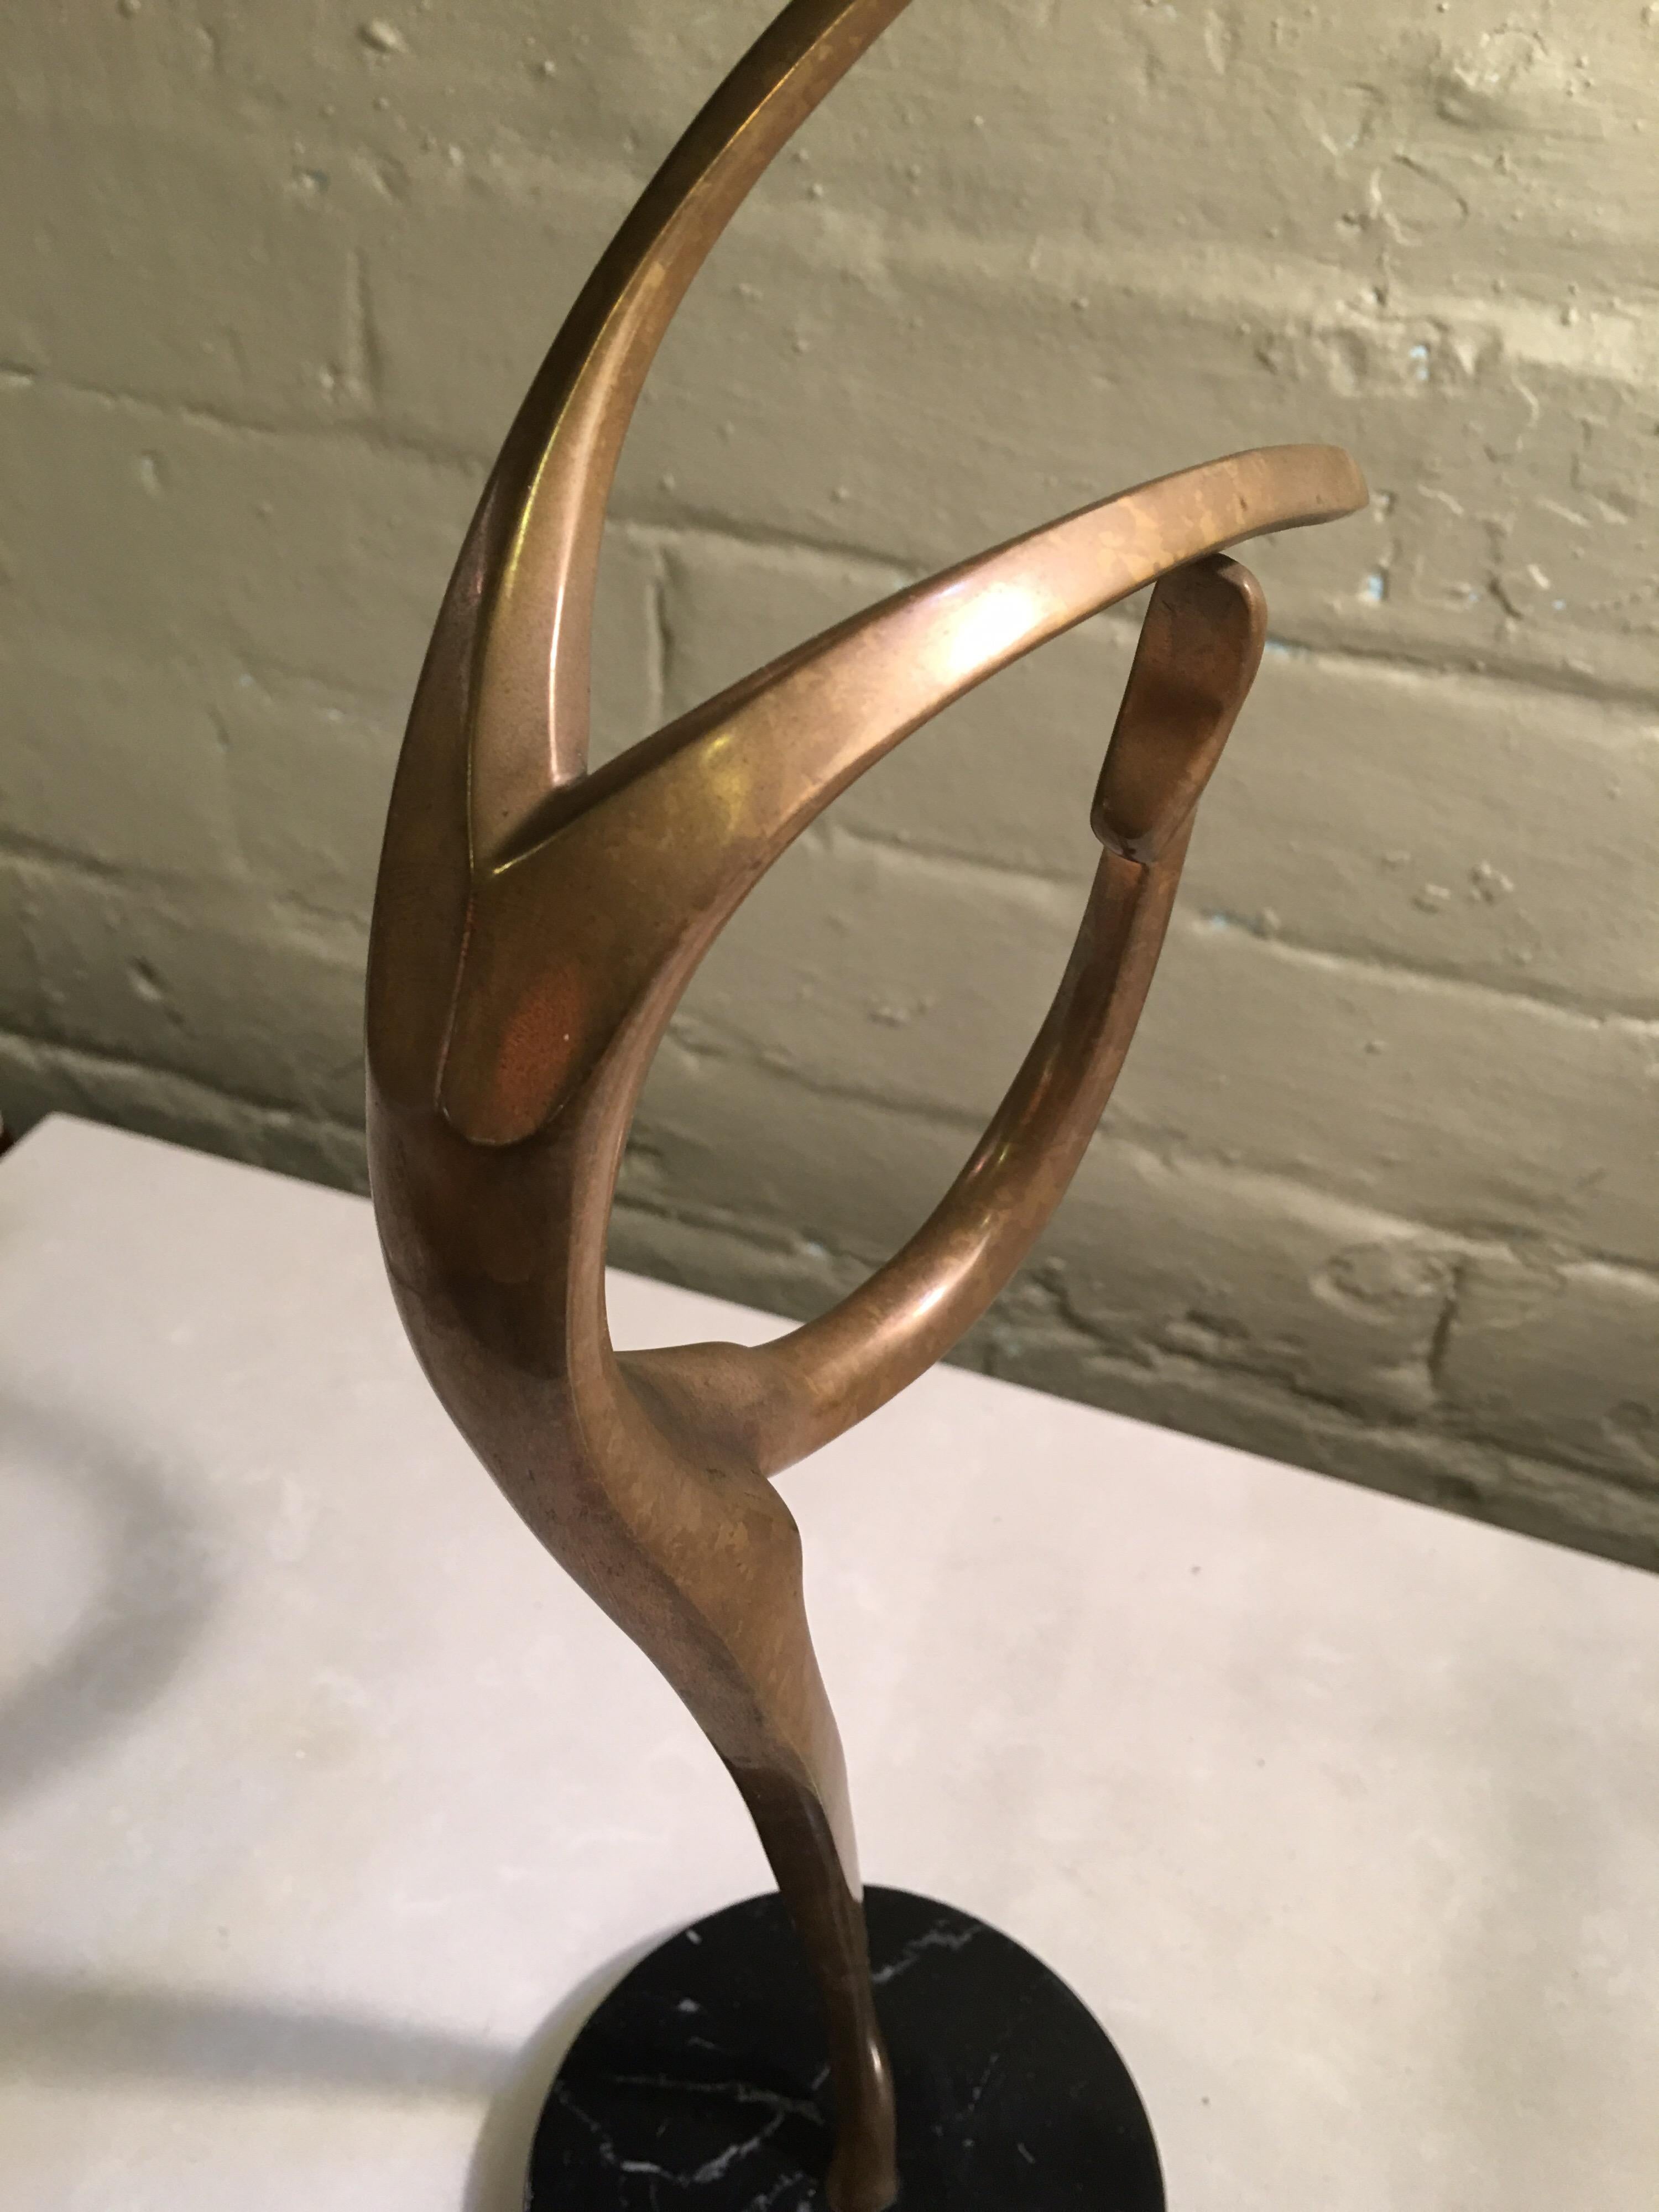 California born identical twin brothers Bob and Tom Bennett bronze sculpture of an abstract dancer. Signed and numbered 77/250.